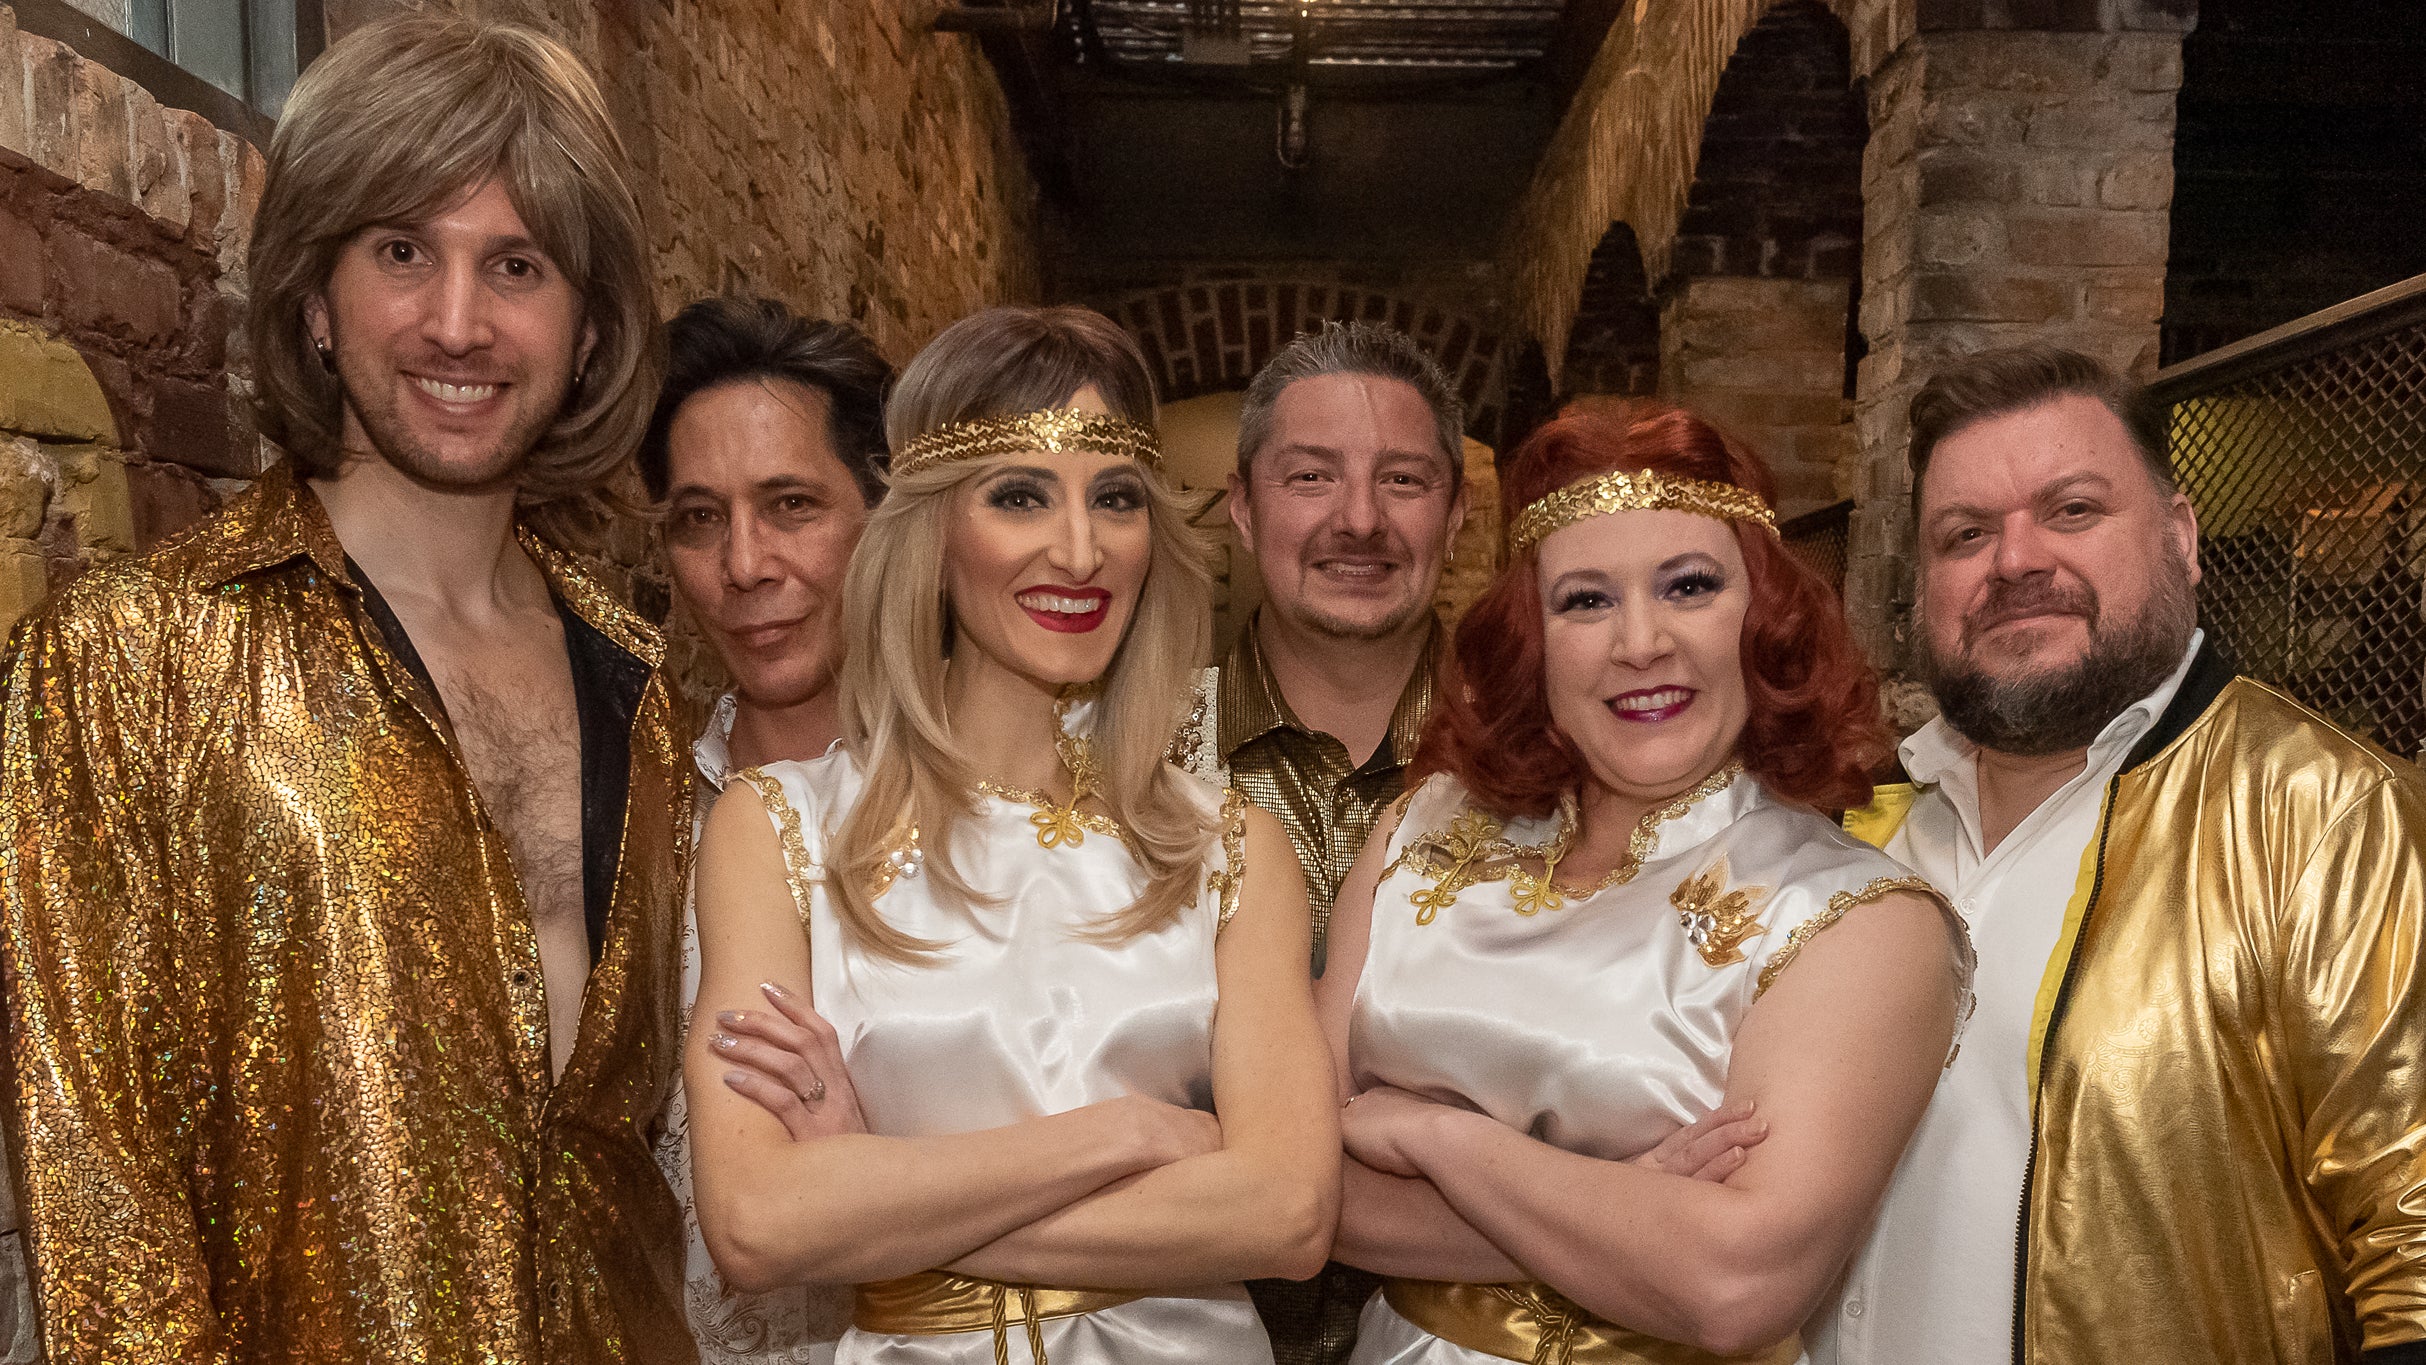 Dancing Queen: A Tribute to Abba in Niagara Falls promo photo for OLG Stage presale offer code